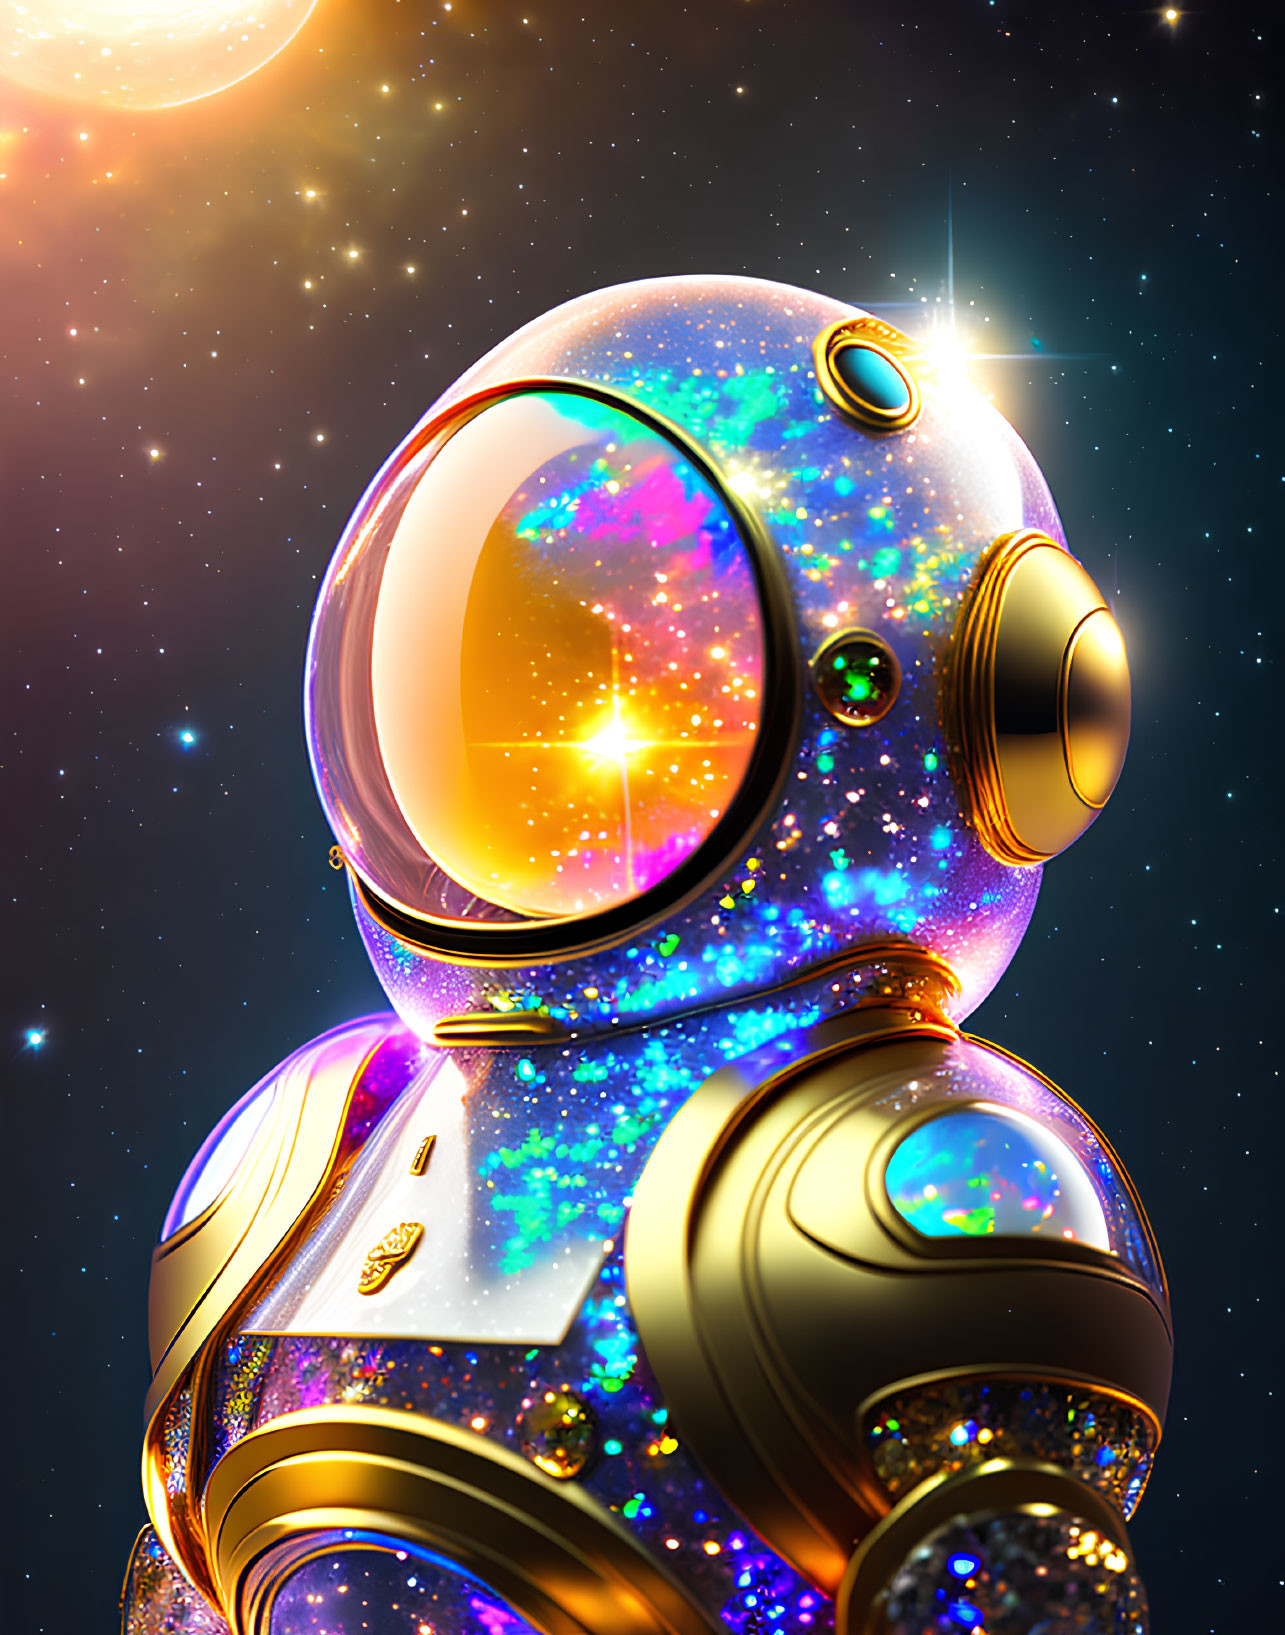 Vibrant cosmic-themed astronaut illustration with glittering spacesuit and starry sky reflection